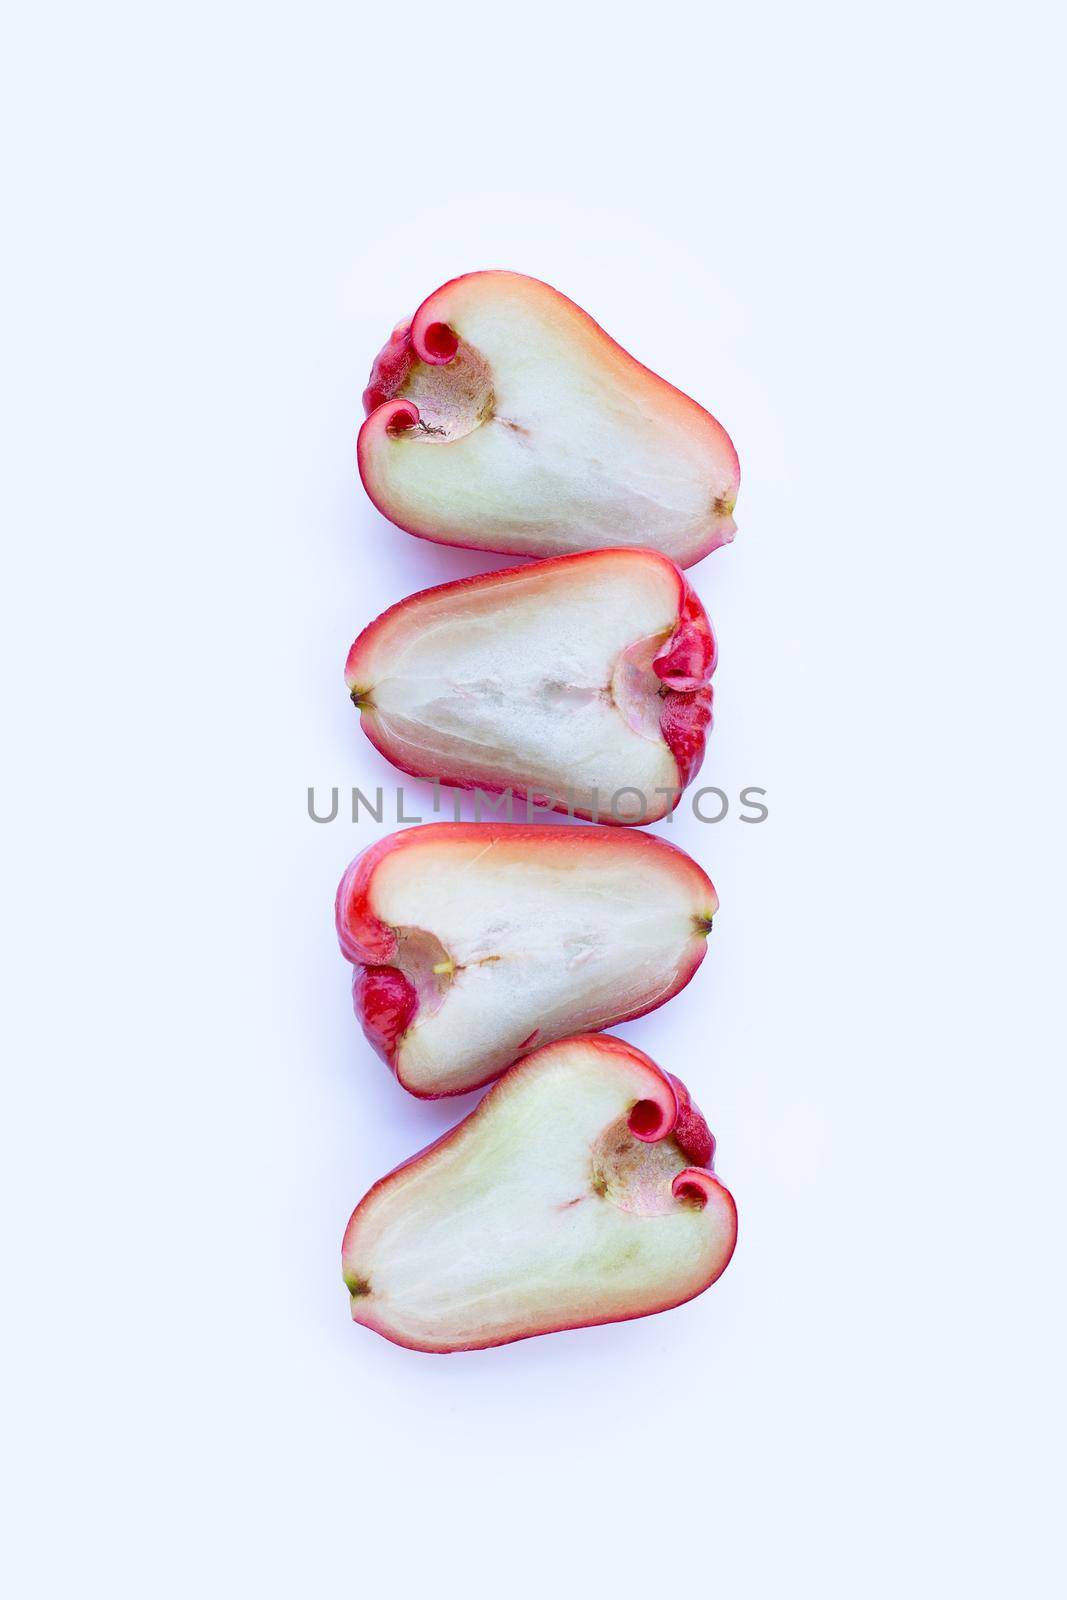 Rose apple isolated on the white background